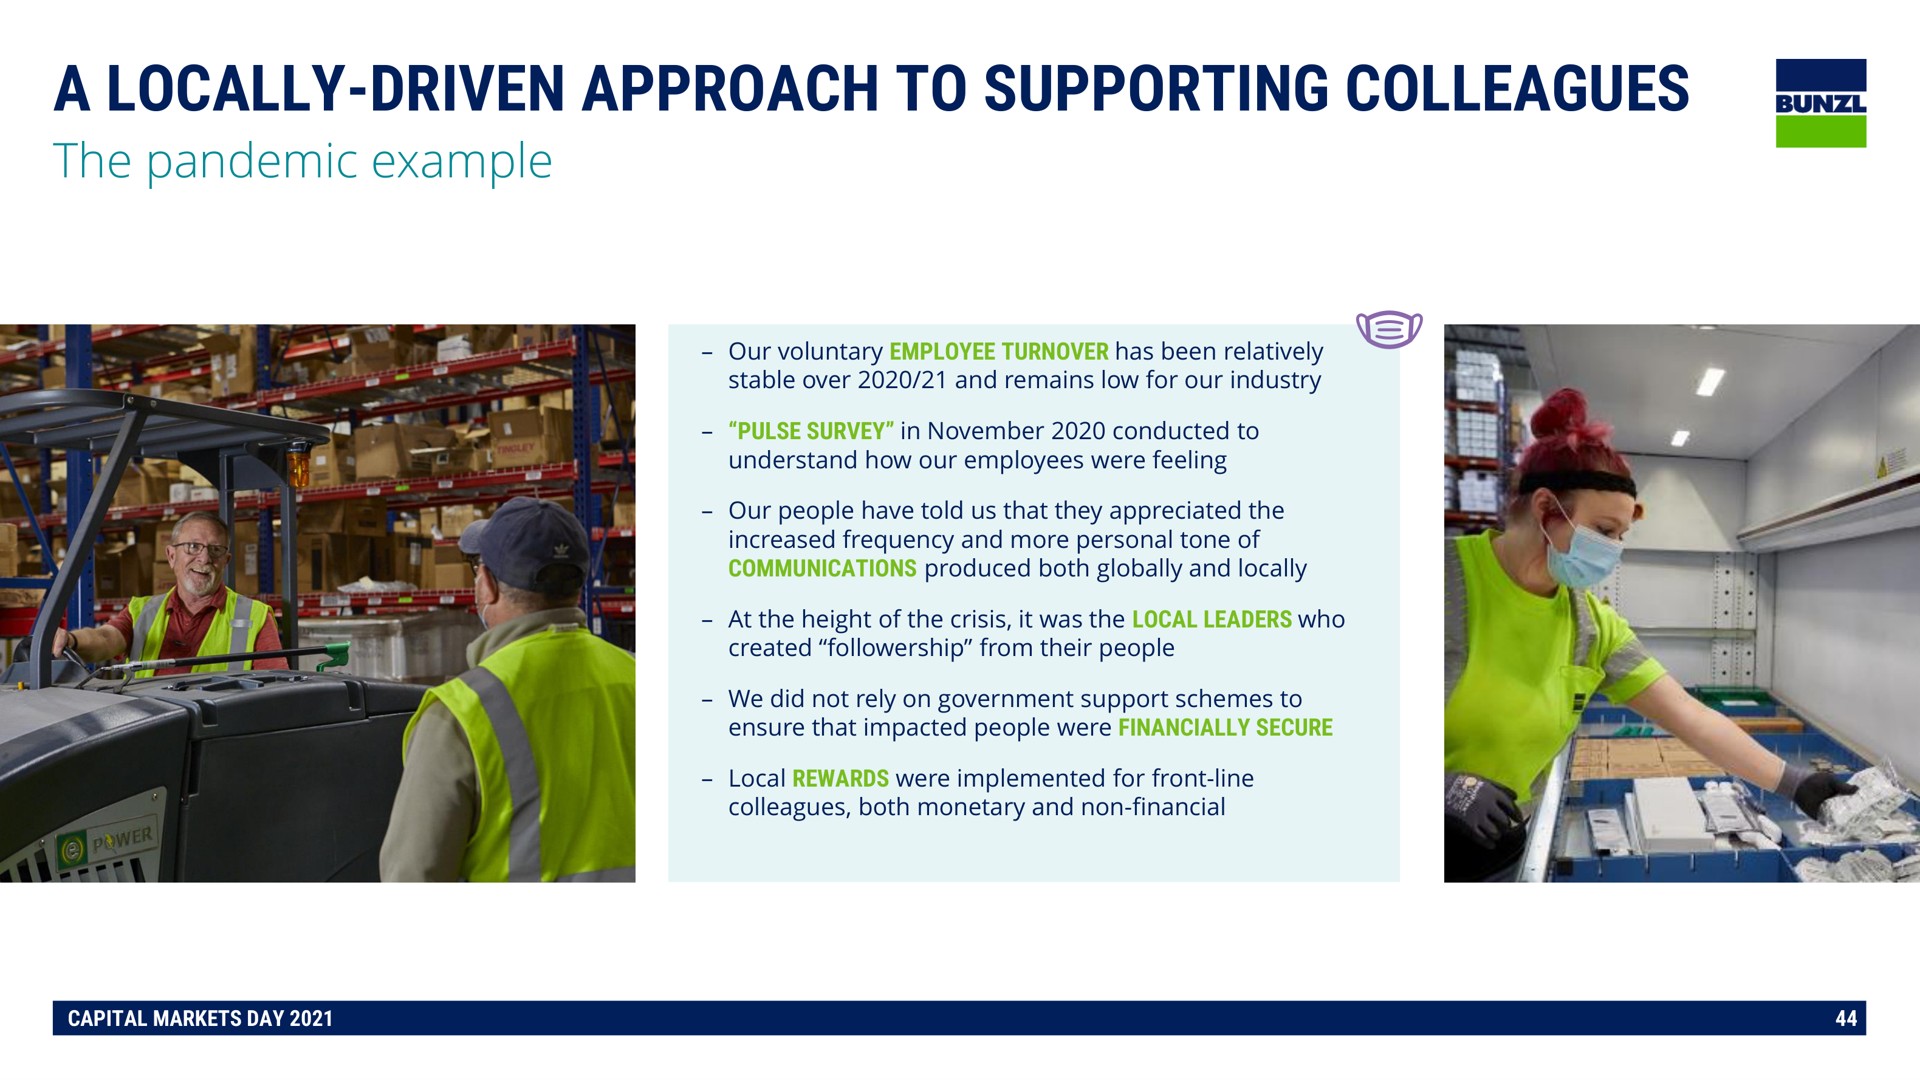 a locally driven approach to supporting colleagues pone | Bunzl